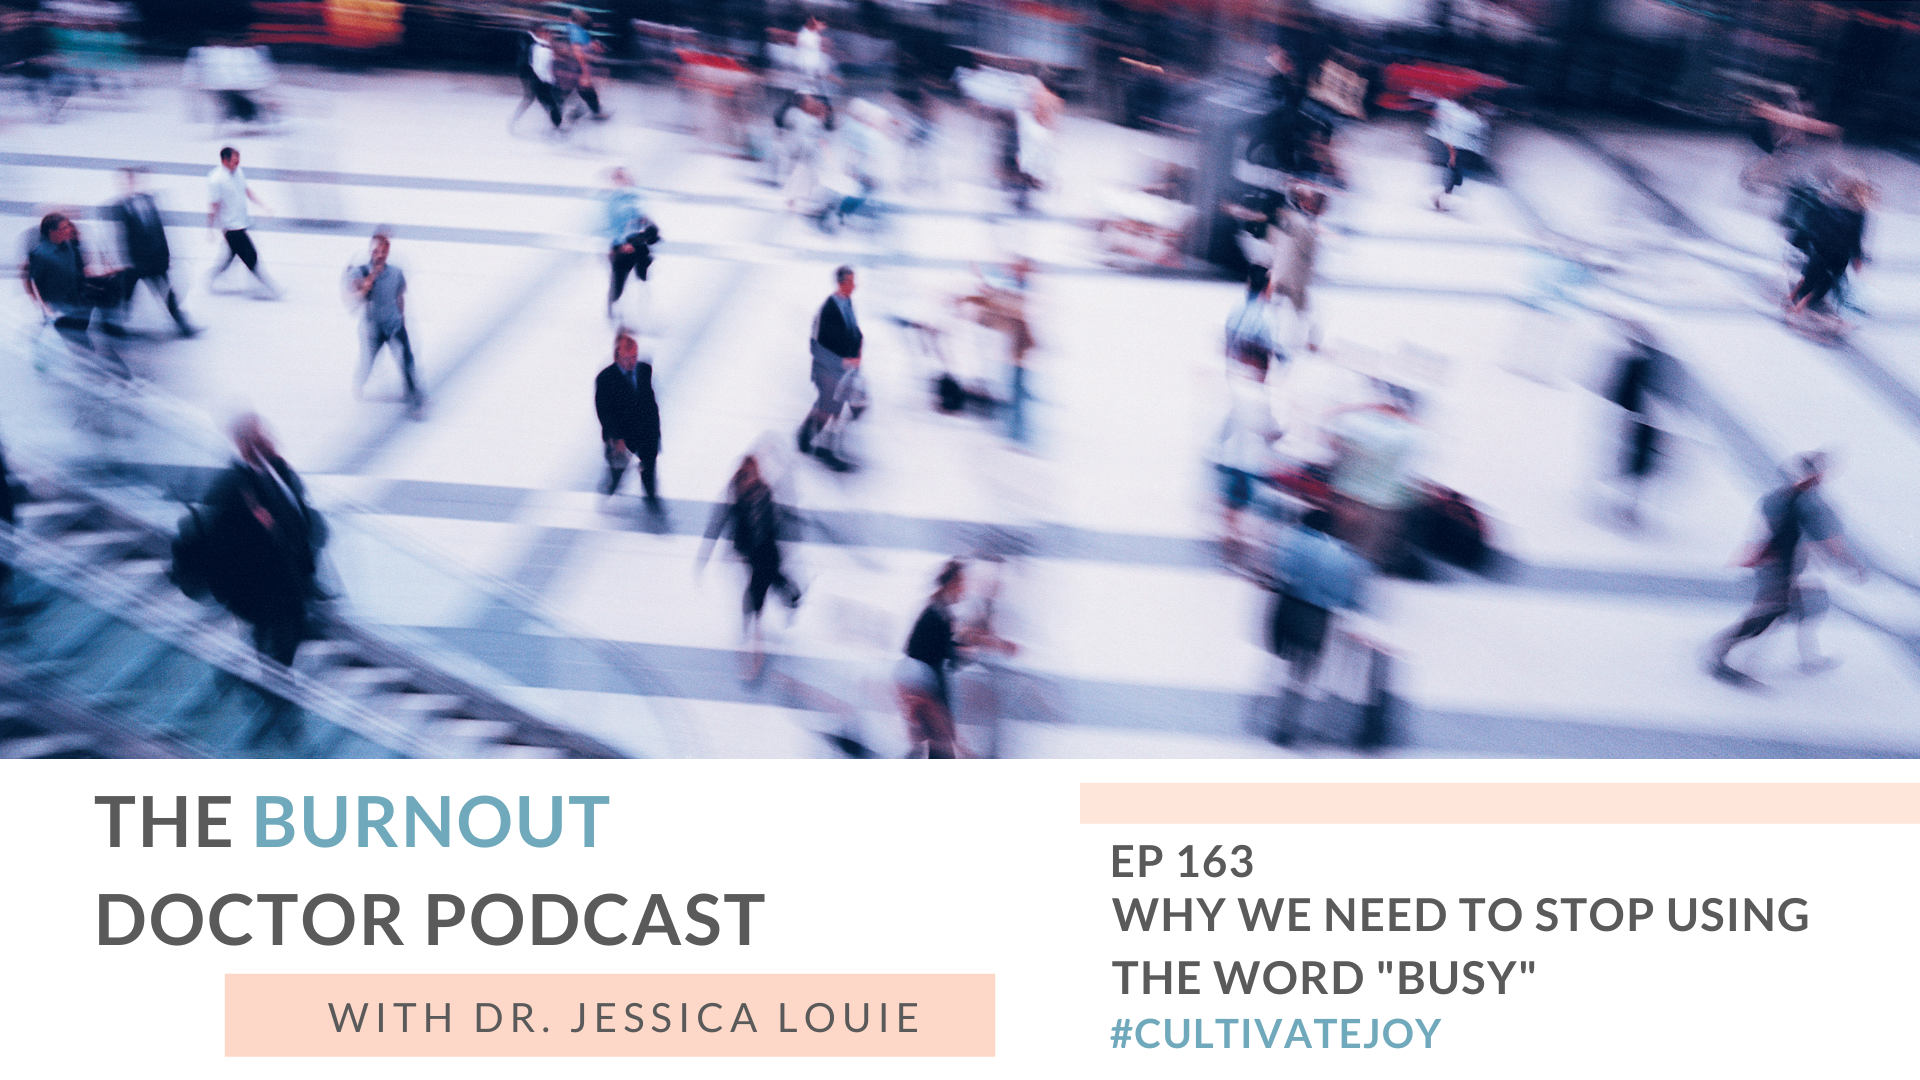 Why we need to stop using the word busy in our language each day. Healthcare burnout. Dr. Jessica Louie. The Burnout Doctor.